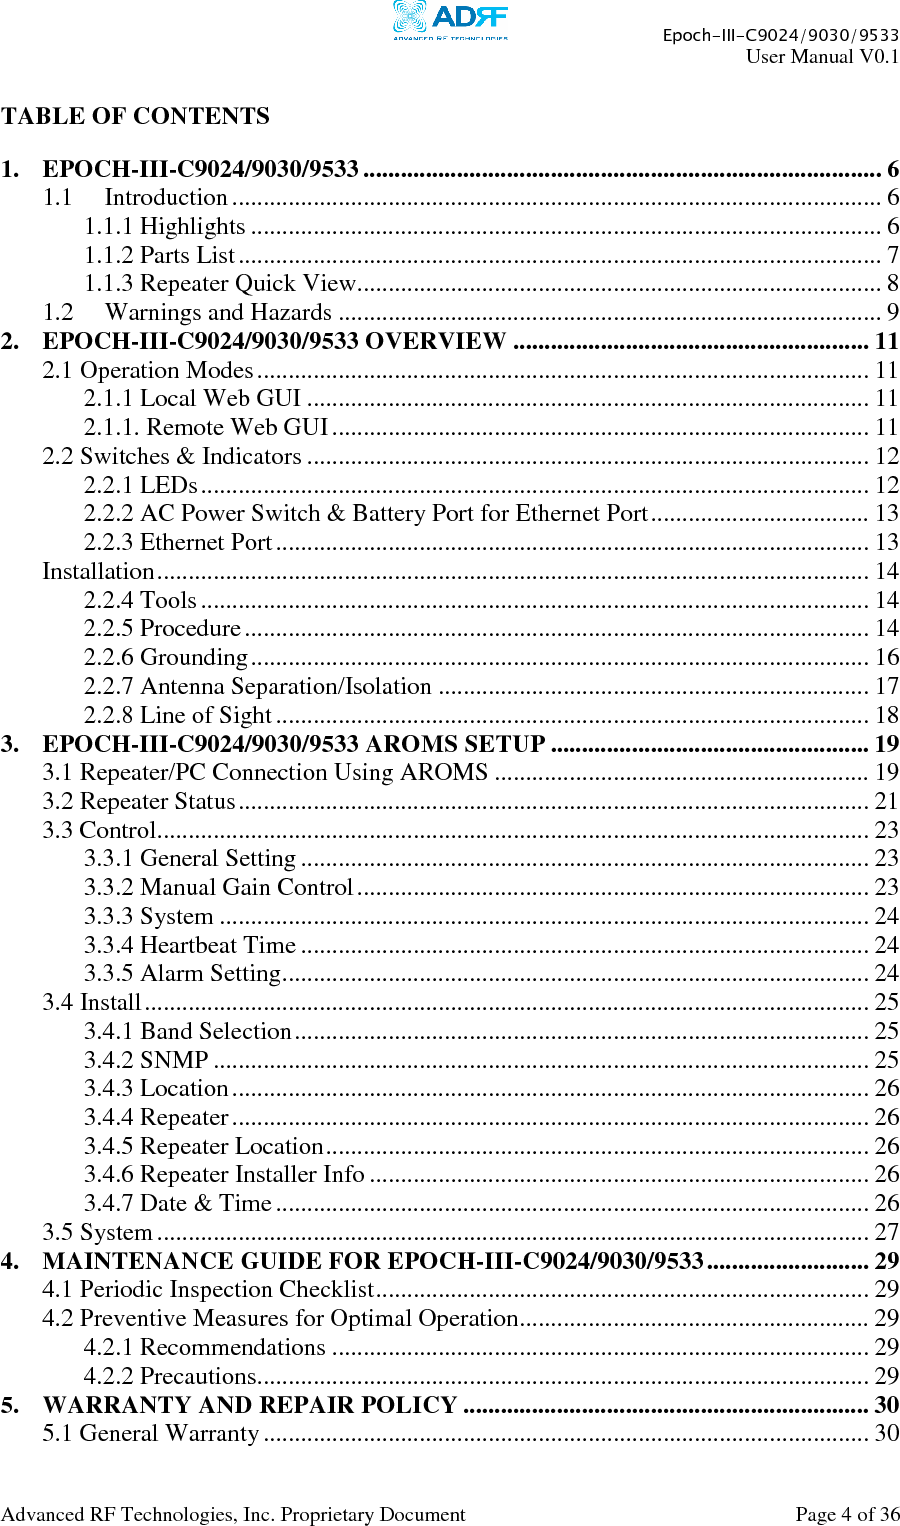     Epoch-III-C9024/9030/9533 User Manual V0.1  Advanced RF Technologies, Inc. Proprietary Document  Page 4 of 36   TABLE OF CONTENTS  1. EPOCH-III-C9024/9030/9533 ................................................................................... 6 1.1 Introduction........................................................................................................ 6 1.1.1 Highlights ..................................................................................................... 6 1.1.2 Parts List....................................................................................................... 7 1.1.3 Repeater Quick View.................................................................................... 8 1.2 Warnings and Hazards ....................................................................................... 9 2. EPOCH-III-C9024/9030/9533 OVERVIEW ......................................................... 11 2.1 Operation Modes.................................................................................................. 11 2.1.1 Local Web GUI .......................................................................................... 11 2.1.1. Remote Web GUI ...................................................................................... 11 2.2 Switches &amp; Indicators .......................................................................................... 12 2.2.1 LEDs........................................................................................................... 12 2.2.2 AC Power Switch &amp; Battery Port for Ethernet Port................................... 13 2.2.3 Ethernet Port............................................................................................... 13 Installation.................................................................................................................. 14 2.2.4 Tools........................................................................................................... 14 2.2.5 Procedure.................................................................................................... 14 2.2.6 Grounding................................................................................................... 16 2.2.7 Antenna Separation/Isolation ..................................................................... 17 2.2.8 Line of Sight............................................................................................... 18 3. EPOCH-III-C9024/9030/9533 AROMS SETUP ................................................... 19 3.1 Repeater/PC Connection Using AROMS ............................................................ 19 3.2 Repeater Status..................................................................................................... 21 3.3 Control.................................................................................................................. 23 3.3.1 General Setting ........................................................................................... 23 3.3.2 Manual Gain Control.................................................................................. 23 3.3.3 System ........................................................................................................ 24 3.3.4 Heartbeat Time ........................................................................................... 24 3.3.5 Alarm Setting.............................................................................................. 24 3.4 Install.................................................................................................................... 25 3.4.1 Band Selection............................................................................................ 25 3.4.2 SNMP ......................................................................................................... 25 3.4.3 Location...................................................................................................... 26 3.4.4 Repeater...................................................................................................... 26 3.4.5 Repeater Location....................................................................................... 26 3.4.6 Repeater Installer Info ................................................................................ 26 3.4.7 Date &amp; Time............................................................................................... 26 3.5 System.................................................................................................................. 27 4. MAINTENANCE GUIDE FOR EPOCH-III-C9024/9030/9533.......................... 29 4.1 Periodic Inspection Checklist............................................................................... 29 4.2 Preventive Measures for Optimal Operation........................................................ 29 4.2.1 Recommendations ...................................................................................... 29 4.2.2 Precautions.................................................................................................. 29 5. WARRANTY AND REPAIR POLICY ................................................................. 30 5.1 General Warranty................................................................................................. 30 